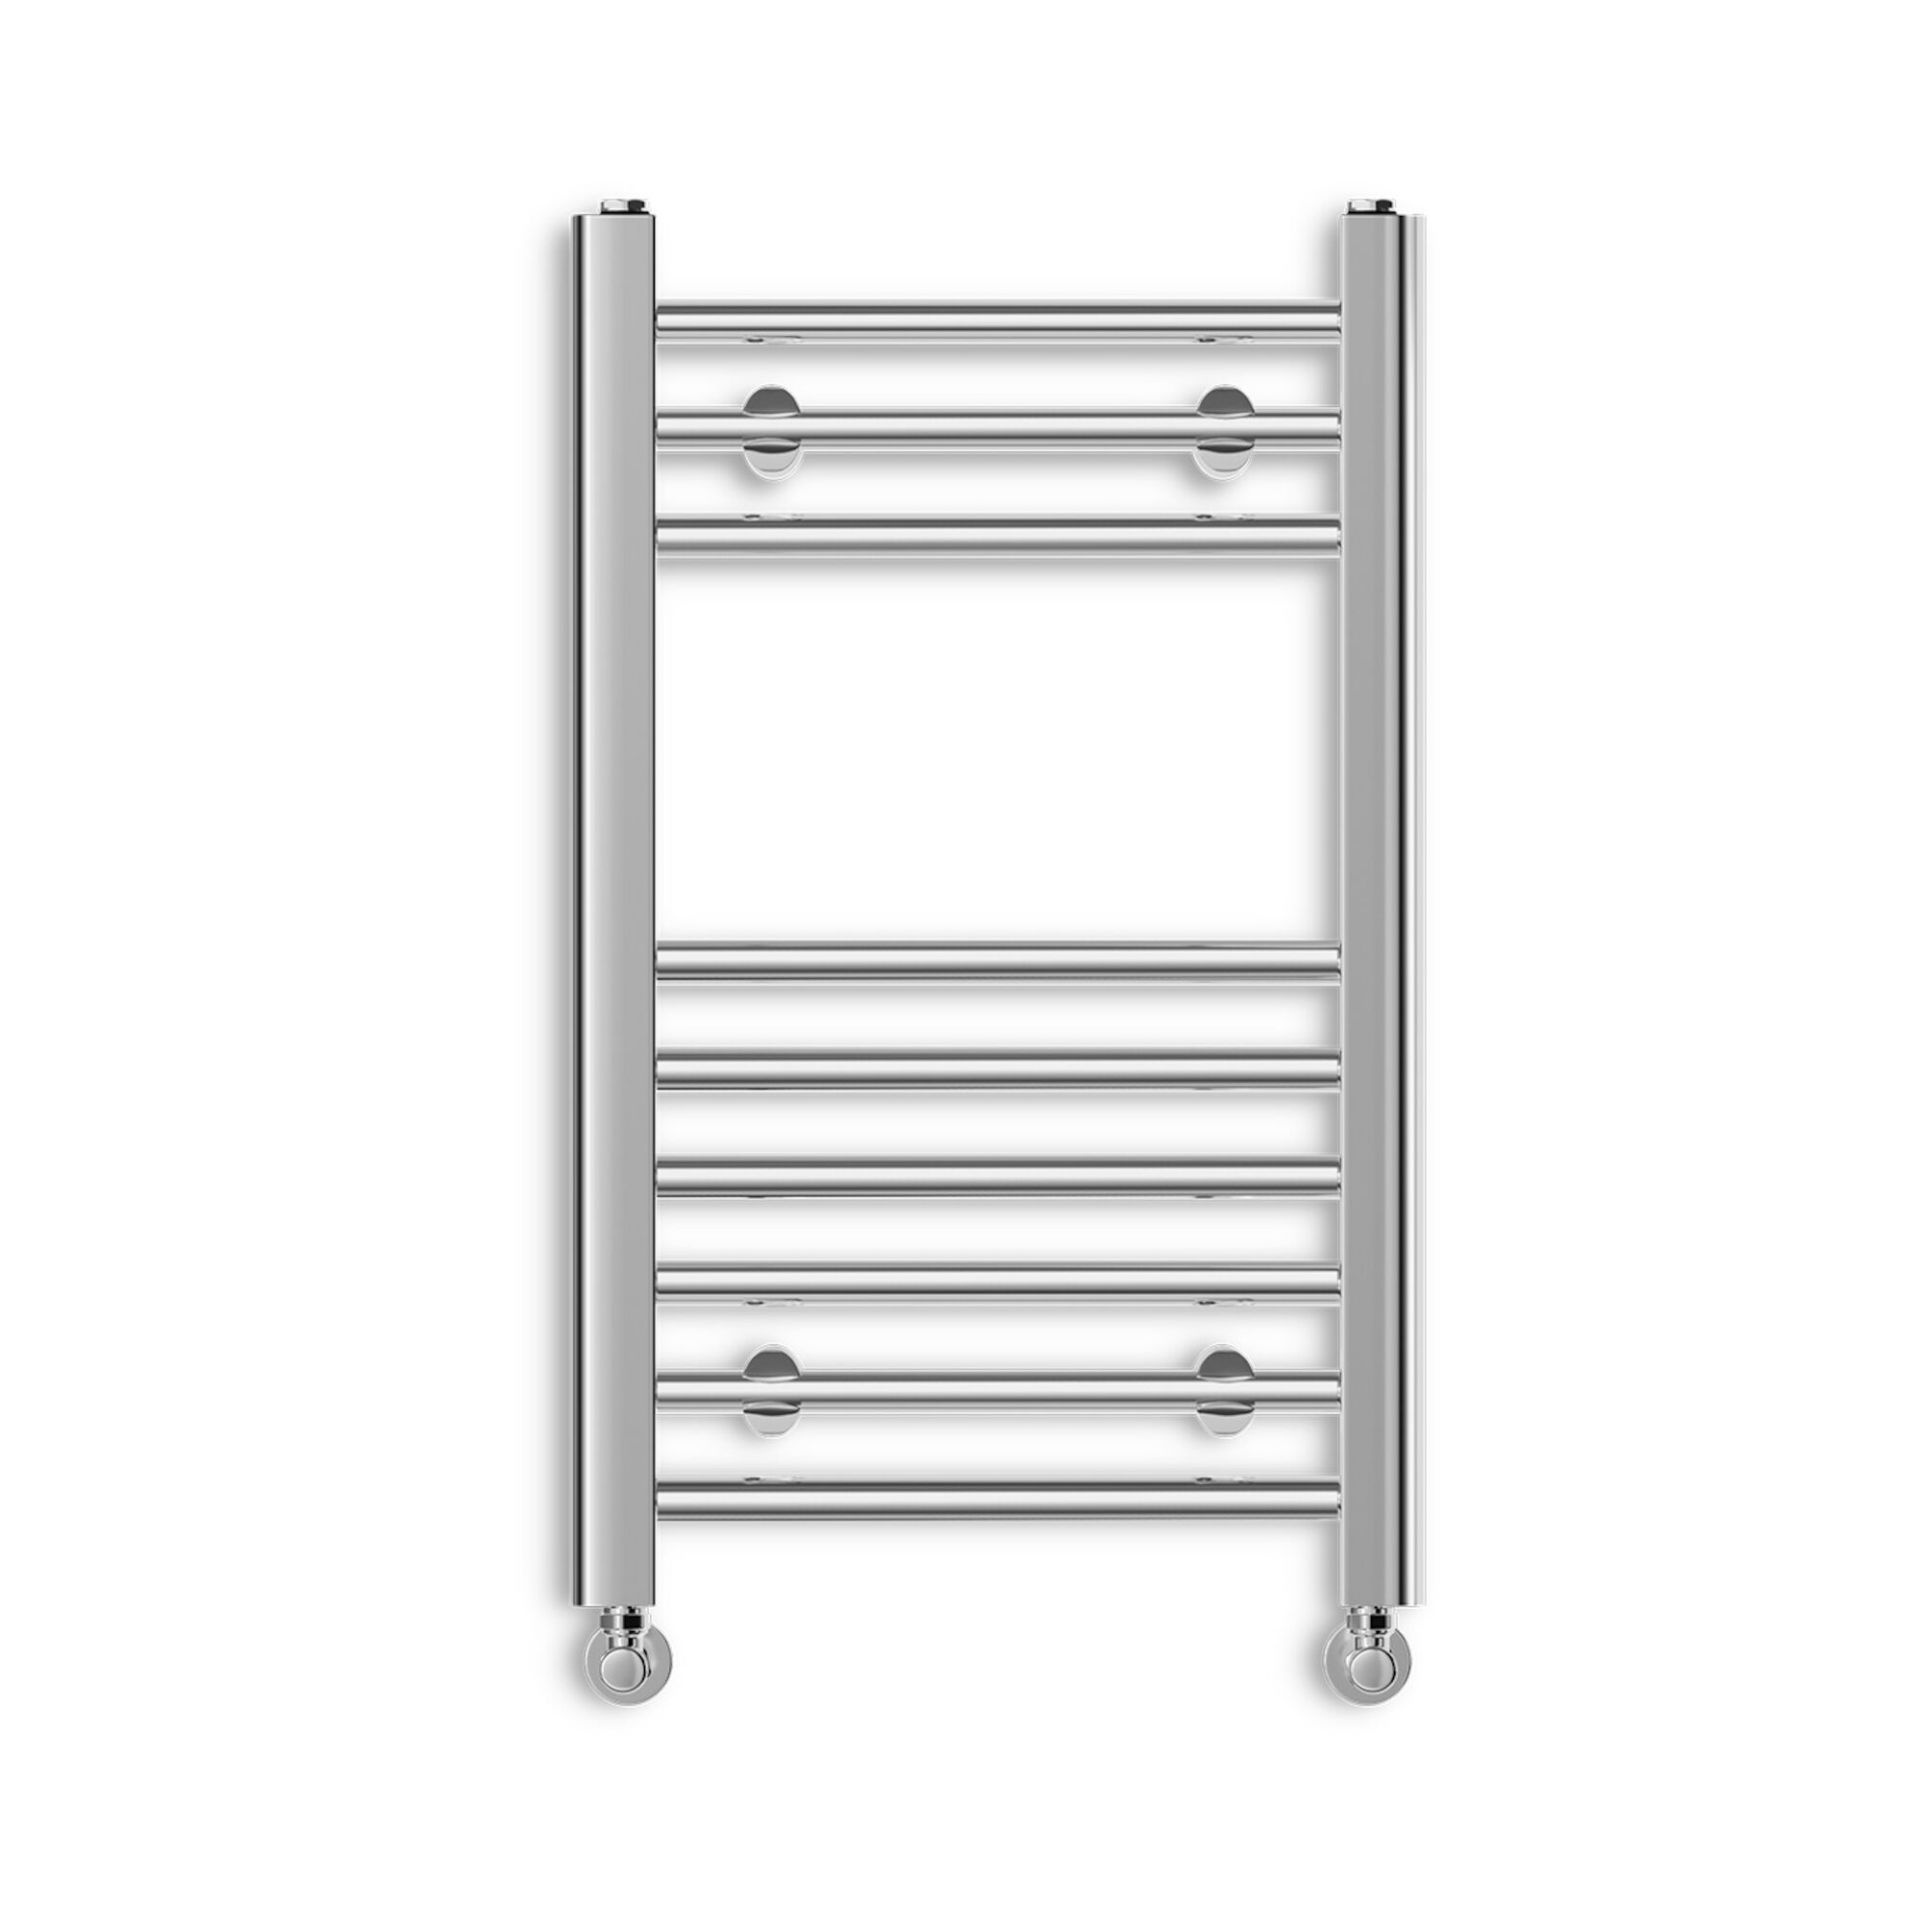 (MW175) 650x400mm Straight Heated Towel Radiator. Low carbon steel chrome plated radiator This - Image 2 of 3